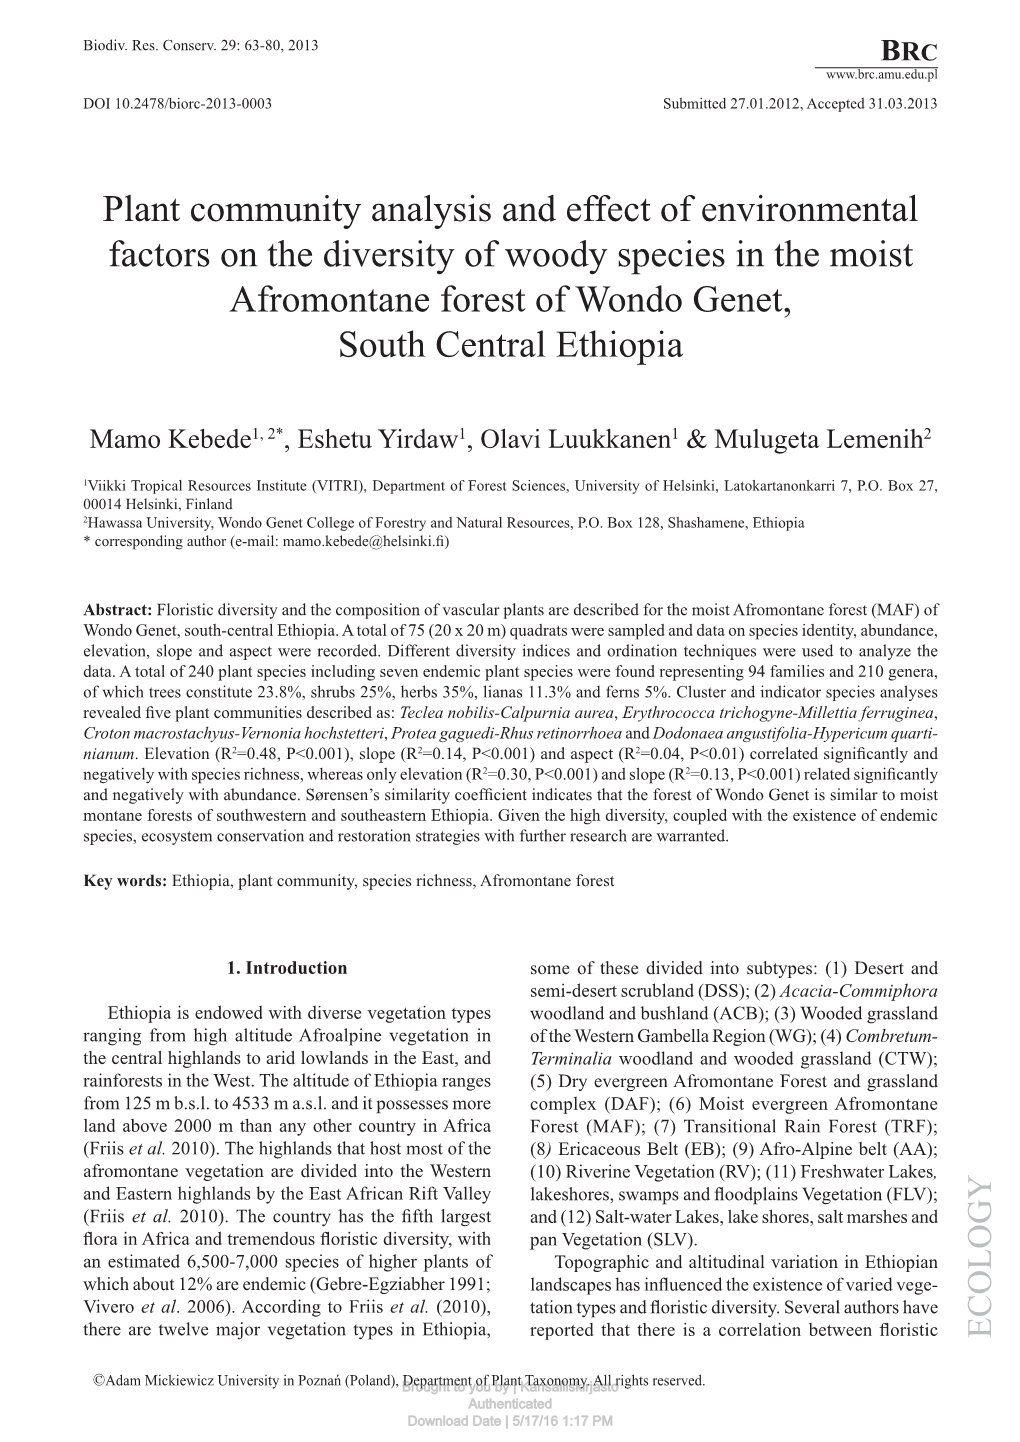 Plant Community Analysis and Effect of Environmental Factors on the Diversity of Woody Species in the Moist Afromontane Forest of Wondo Genet, South Central Ethiopia